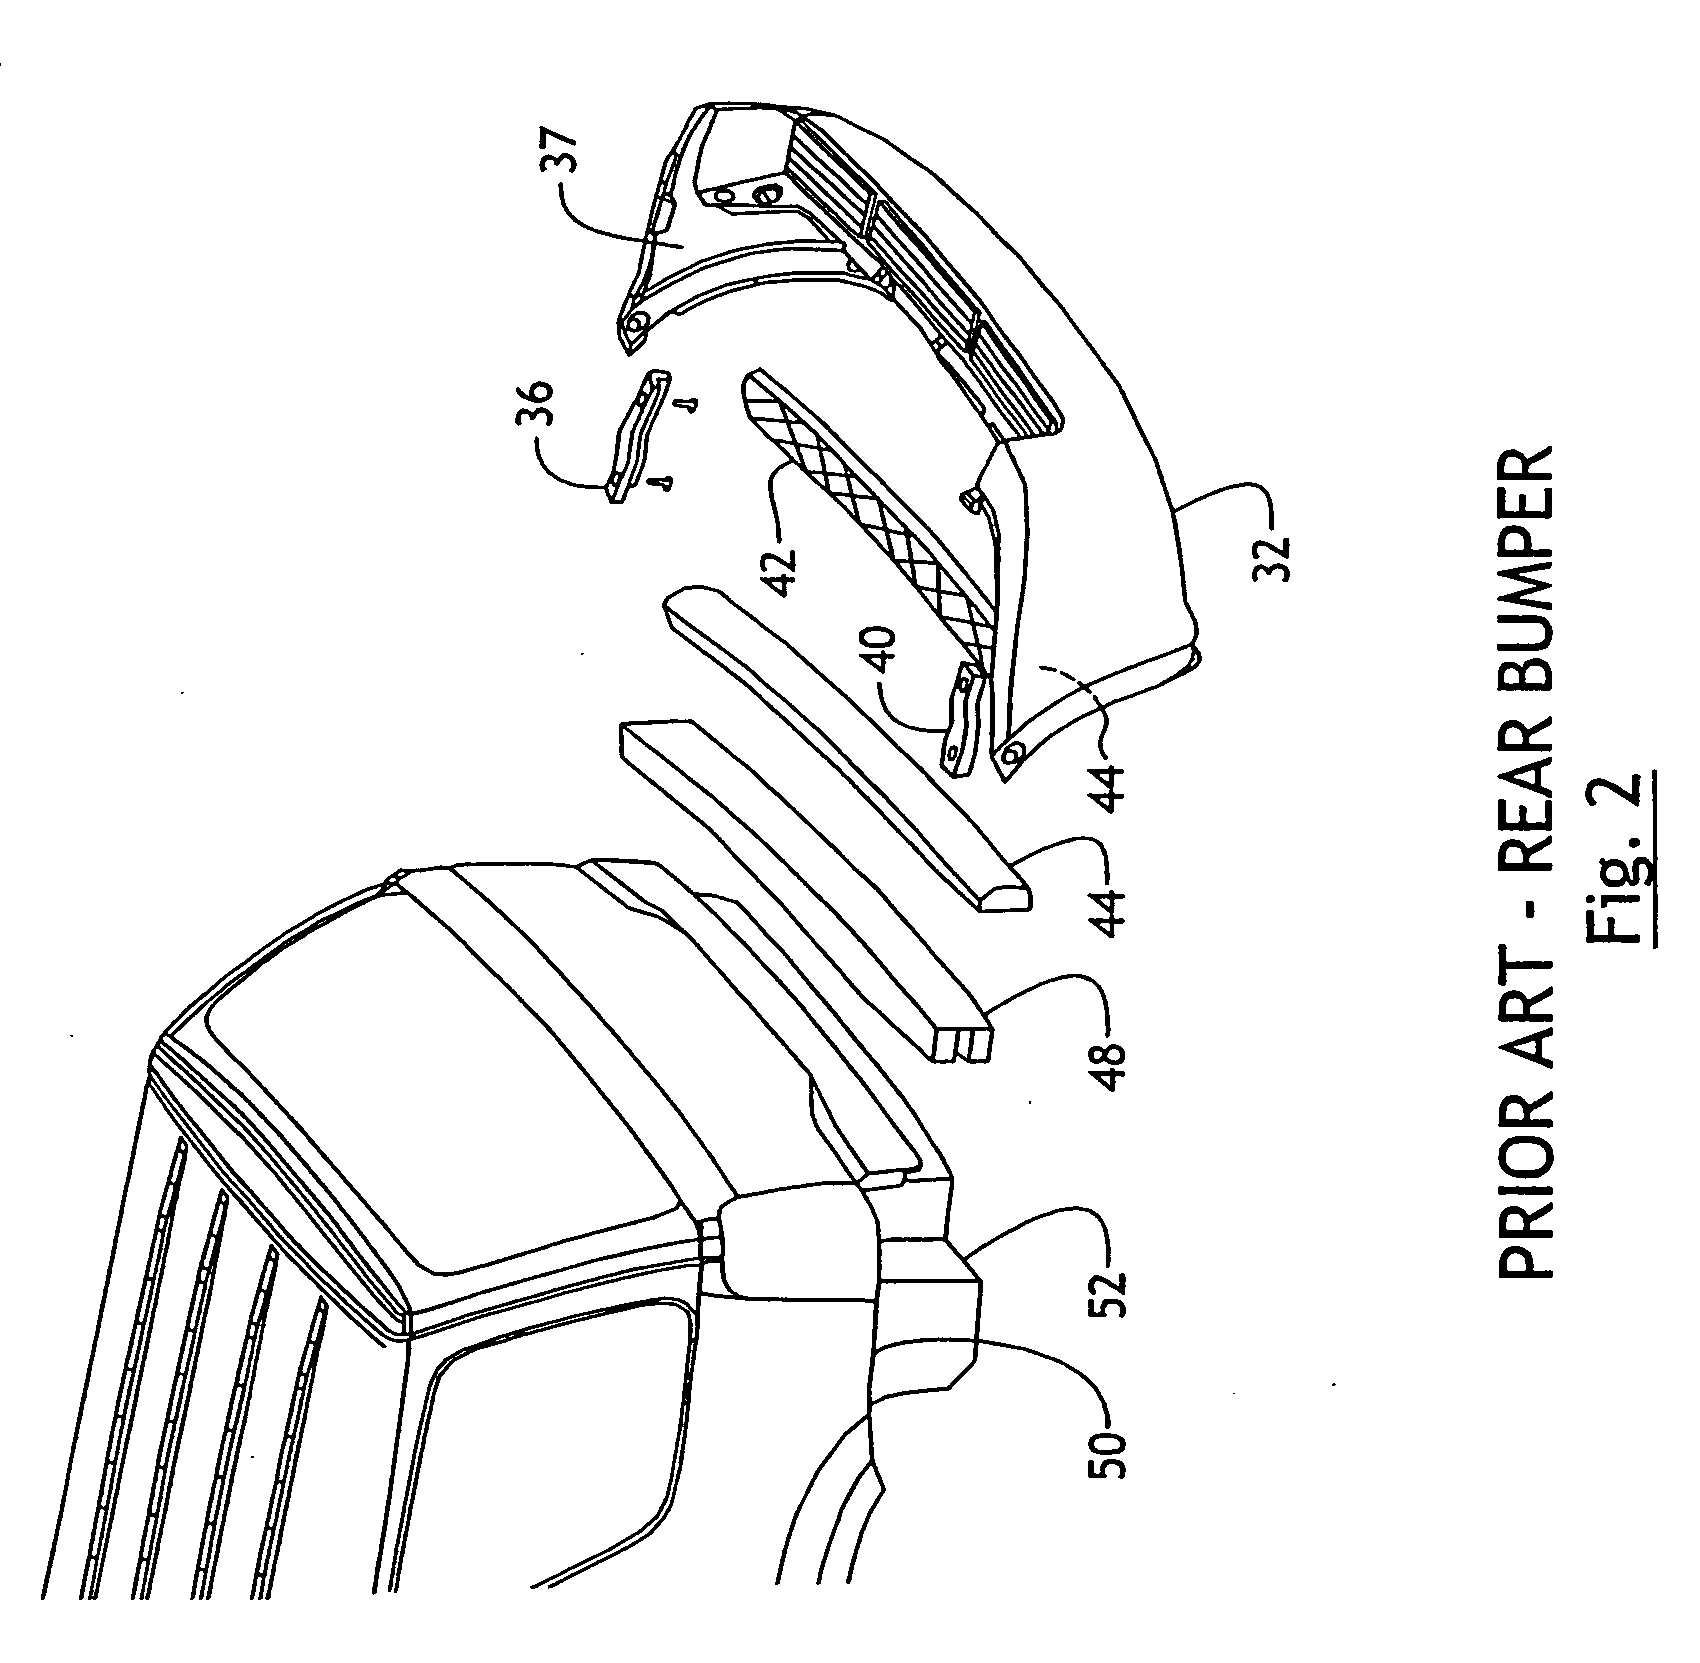 Integrated co-injection molded vehicle components and methods of making the same